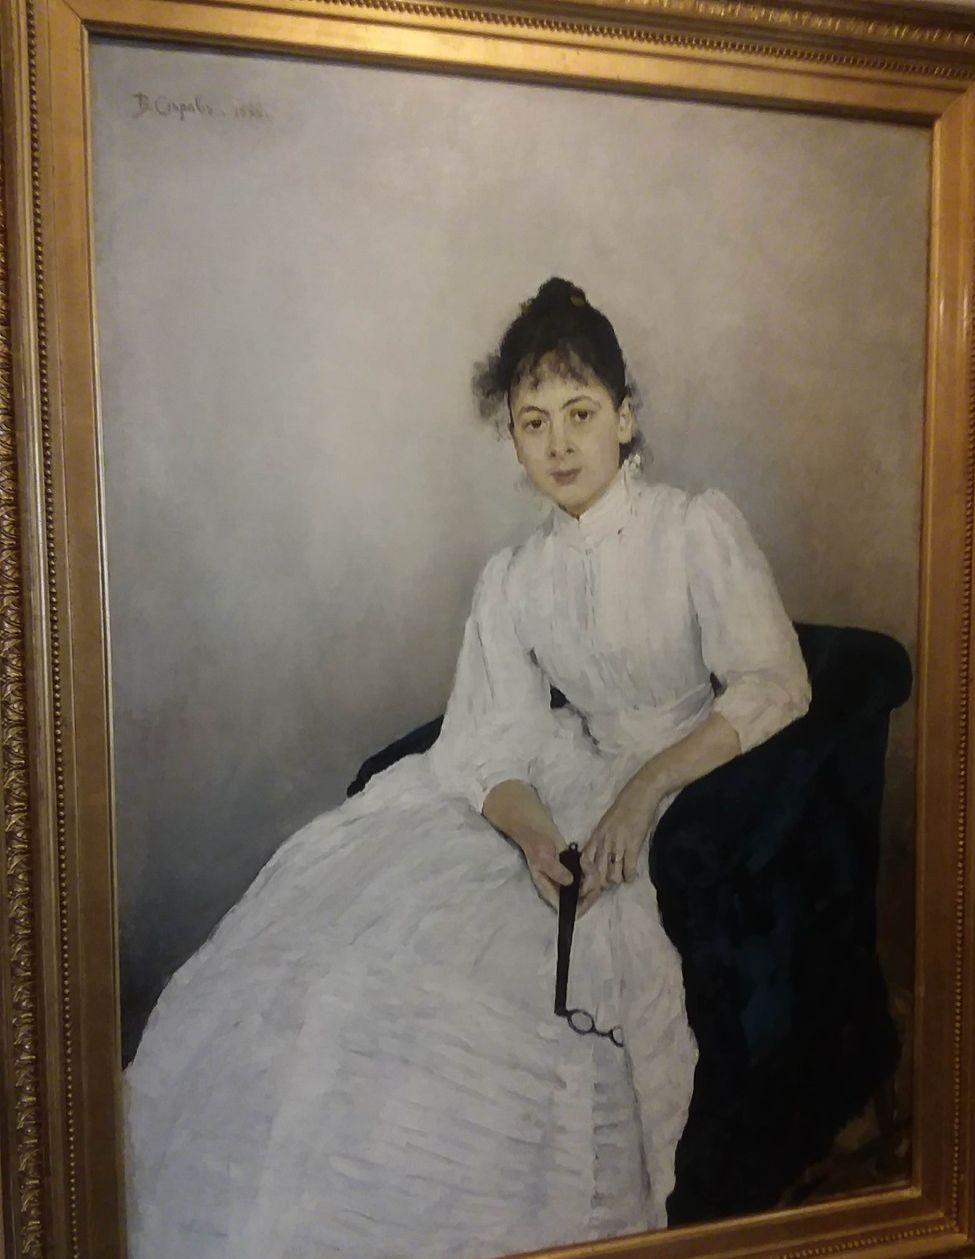 In Malmö Castle is this portrait painting   of Maria F. Jalcuntjikova painted by Valentin Serov.